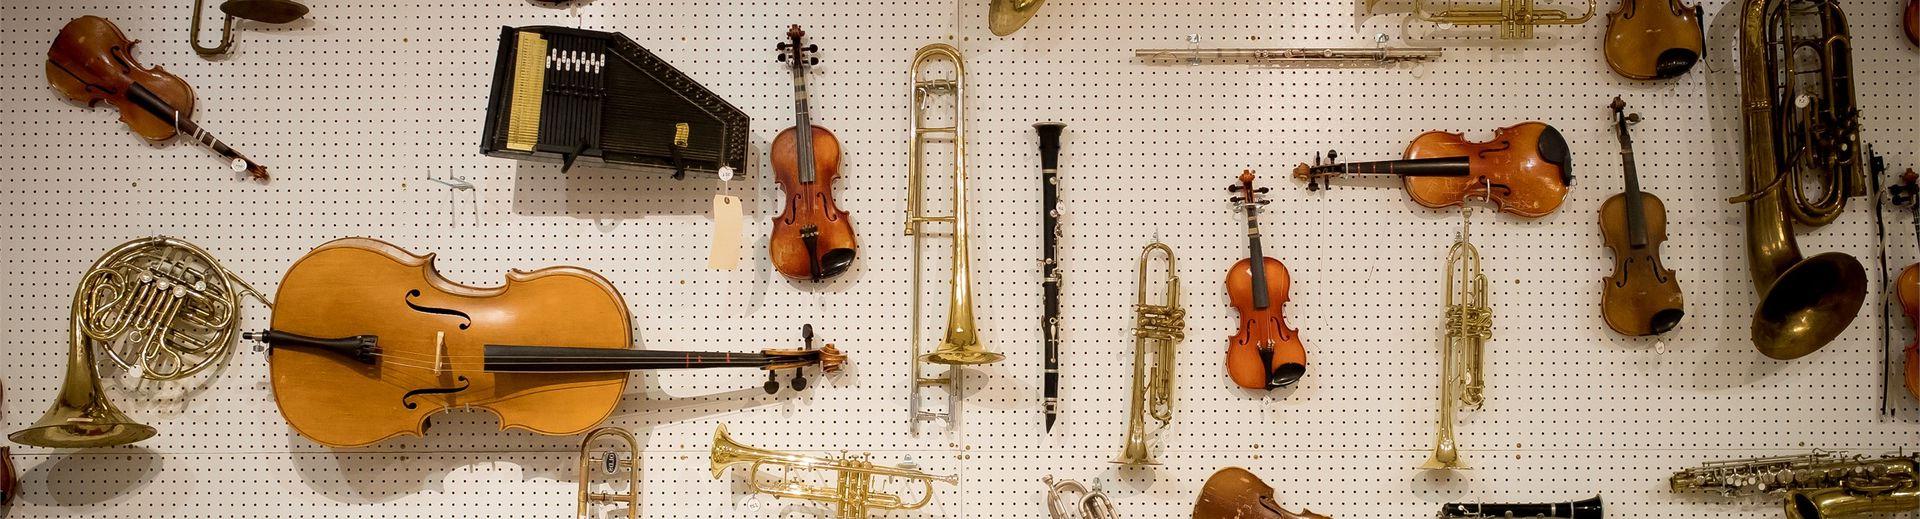 Many different instruments hanging on a pegboard wall.